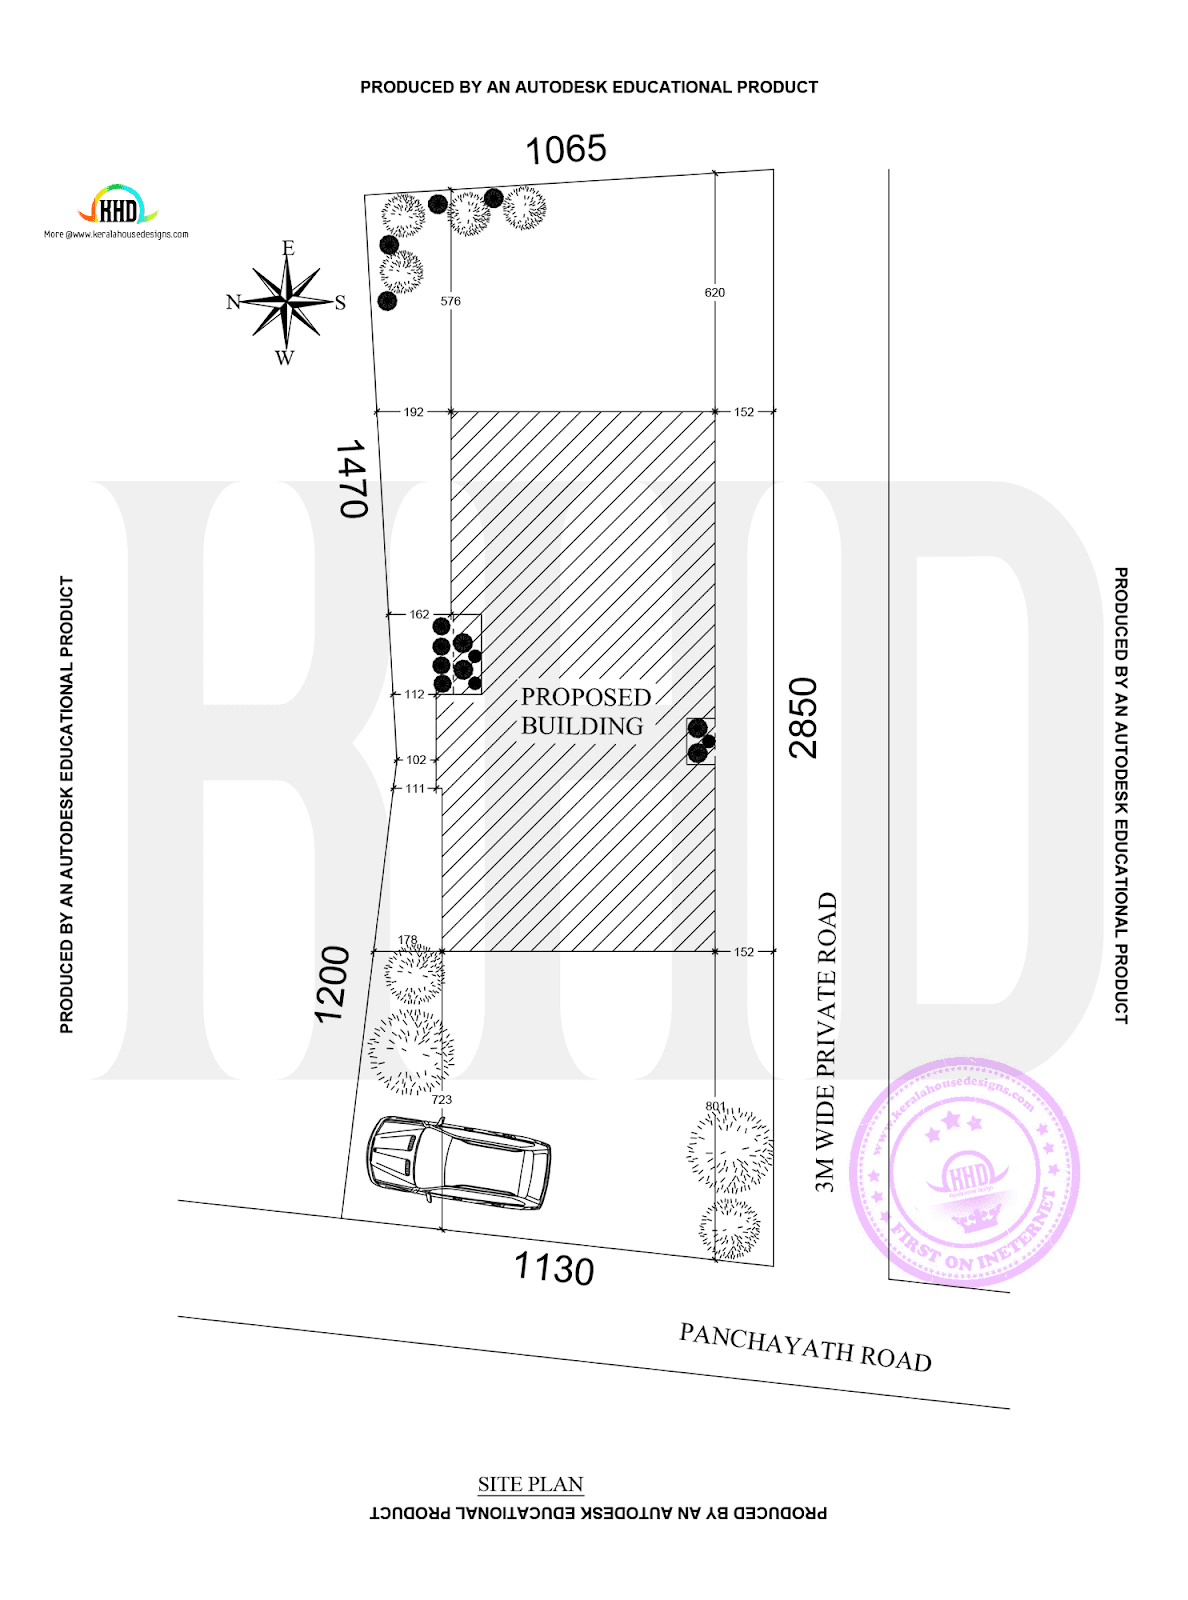 A comprehensive site plan illustrating the positioning of the villa within its surroundings.